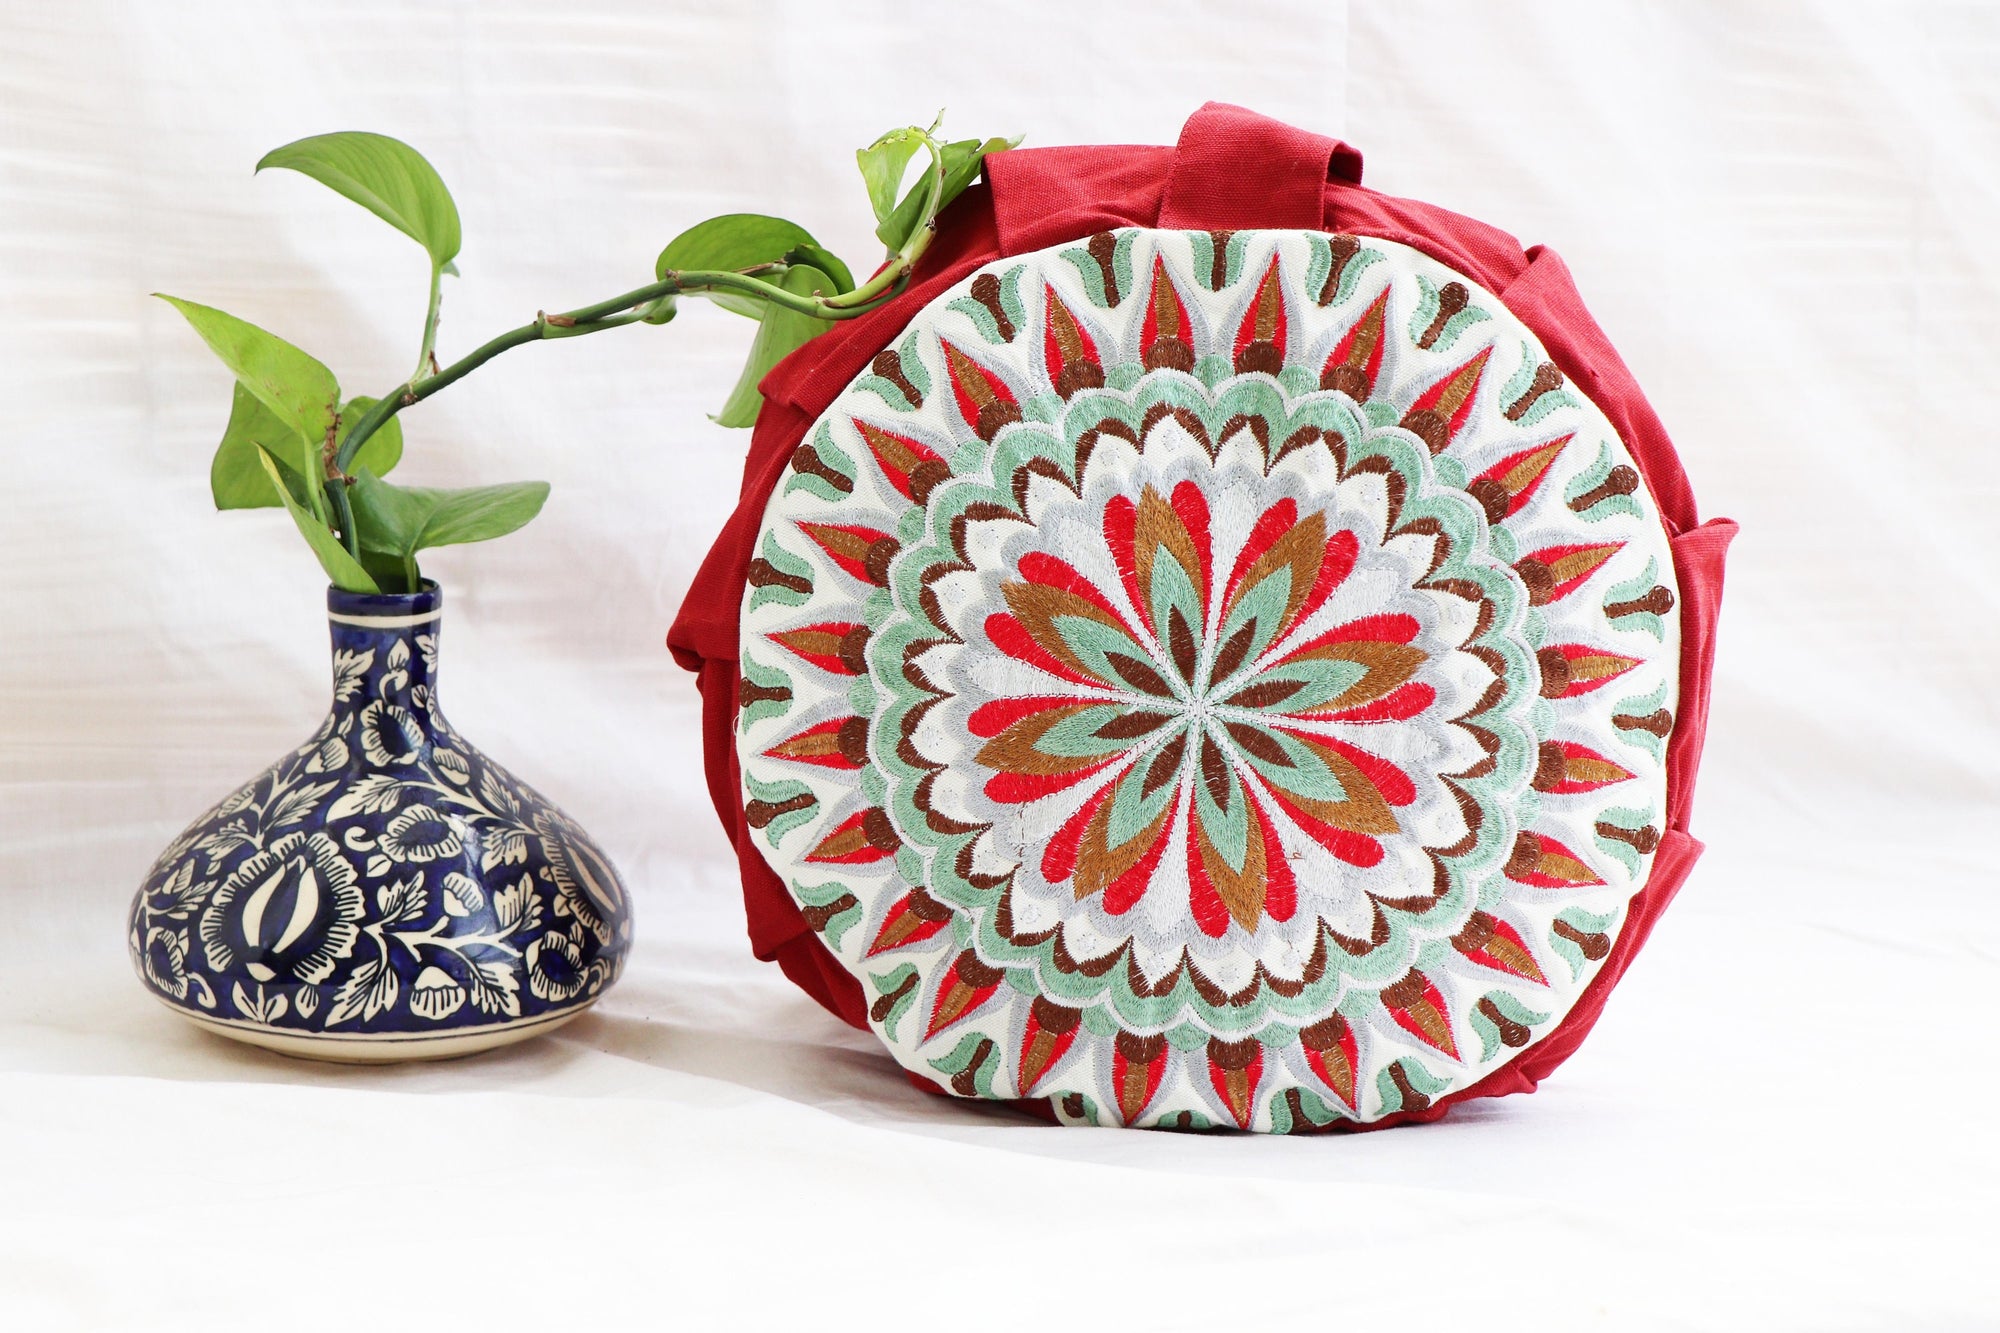 Embroidered Round Zafu Yoga Pillow |Zipped Cover |Washable| Portable - Size Medium - Mandala - Red Rose - Filling Options - Pre-Orders